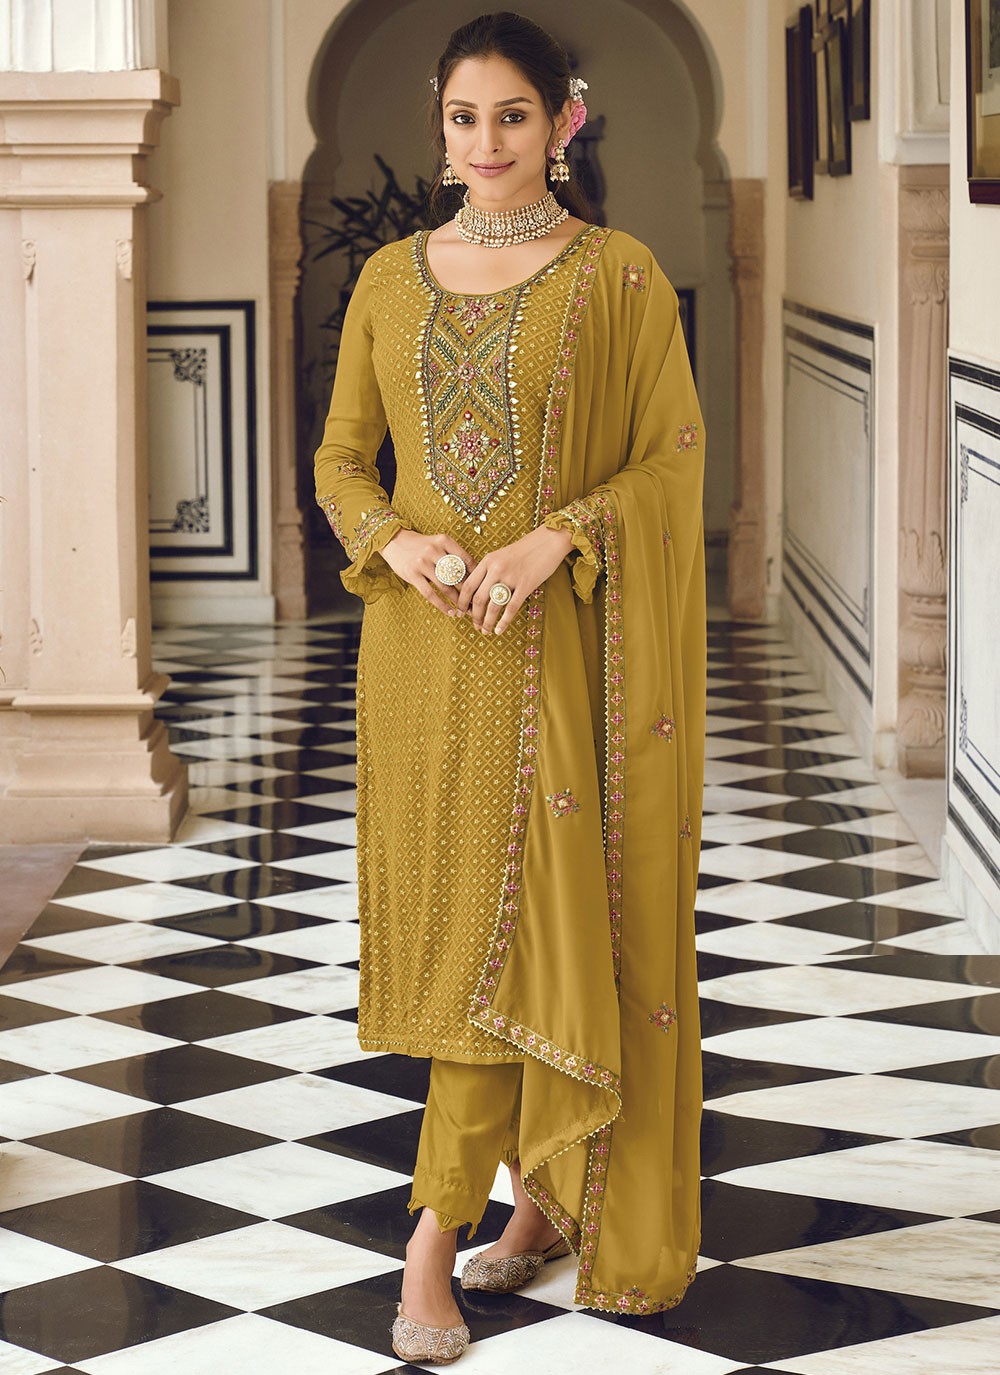 Faux Georgette Green Embroidered Salwar Suit